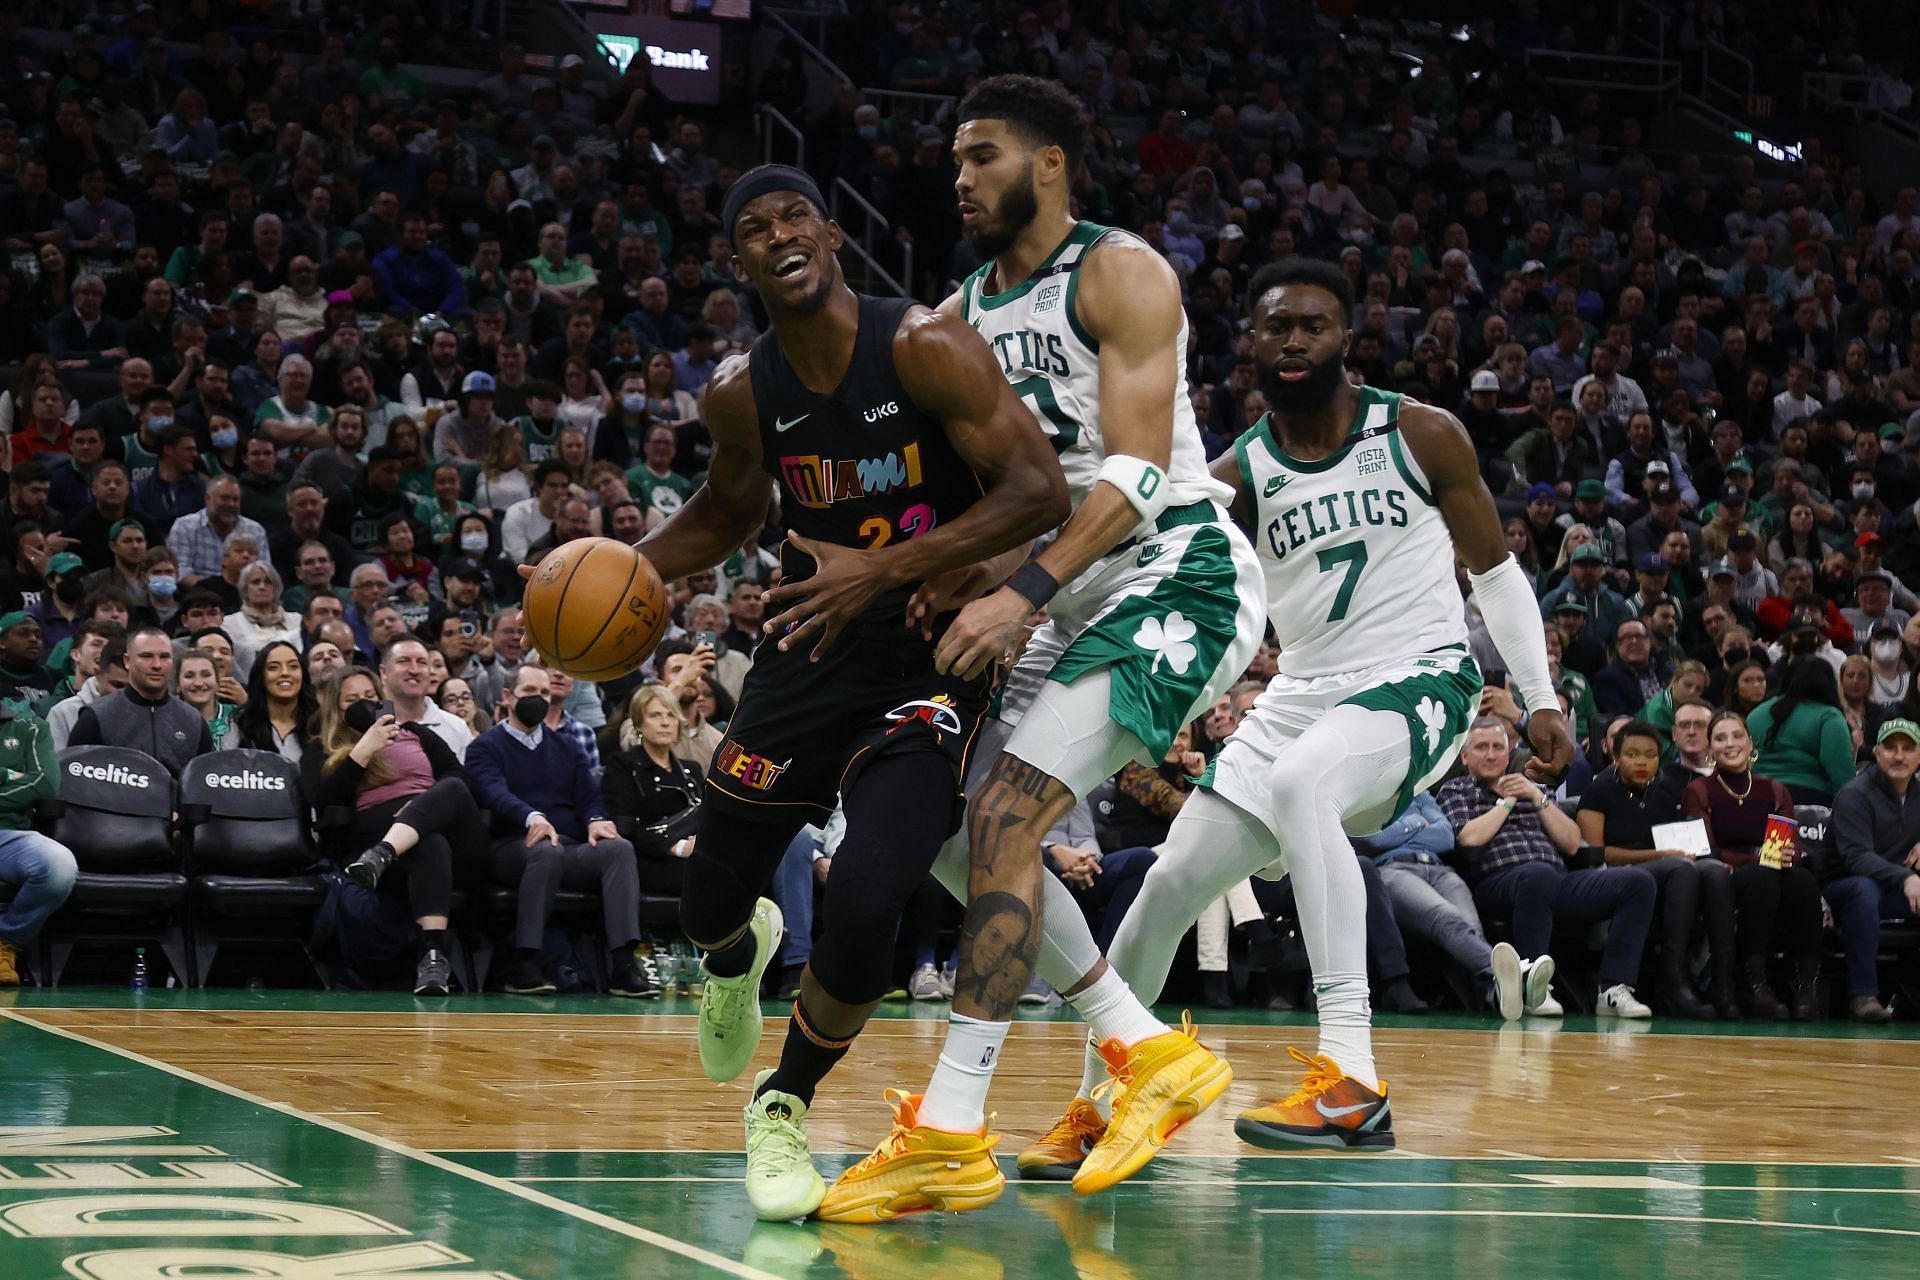 Two defensively elite teams, both the Celtics and the Heat go into the Eastern Conference finals as legitimate contenders to win the NBA championship.